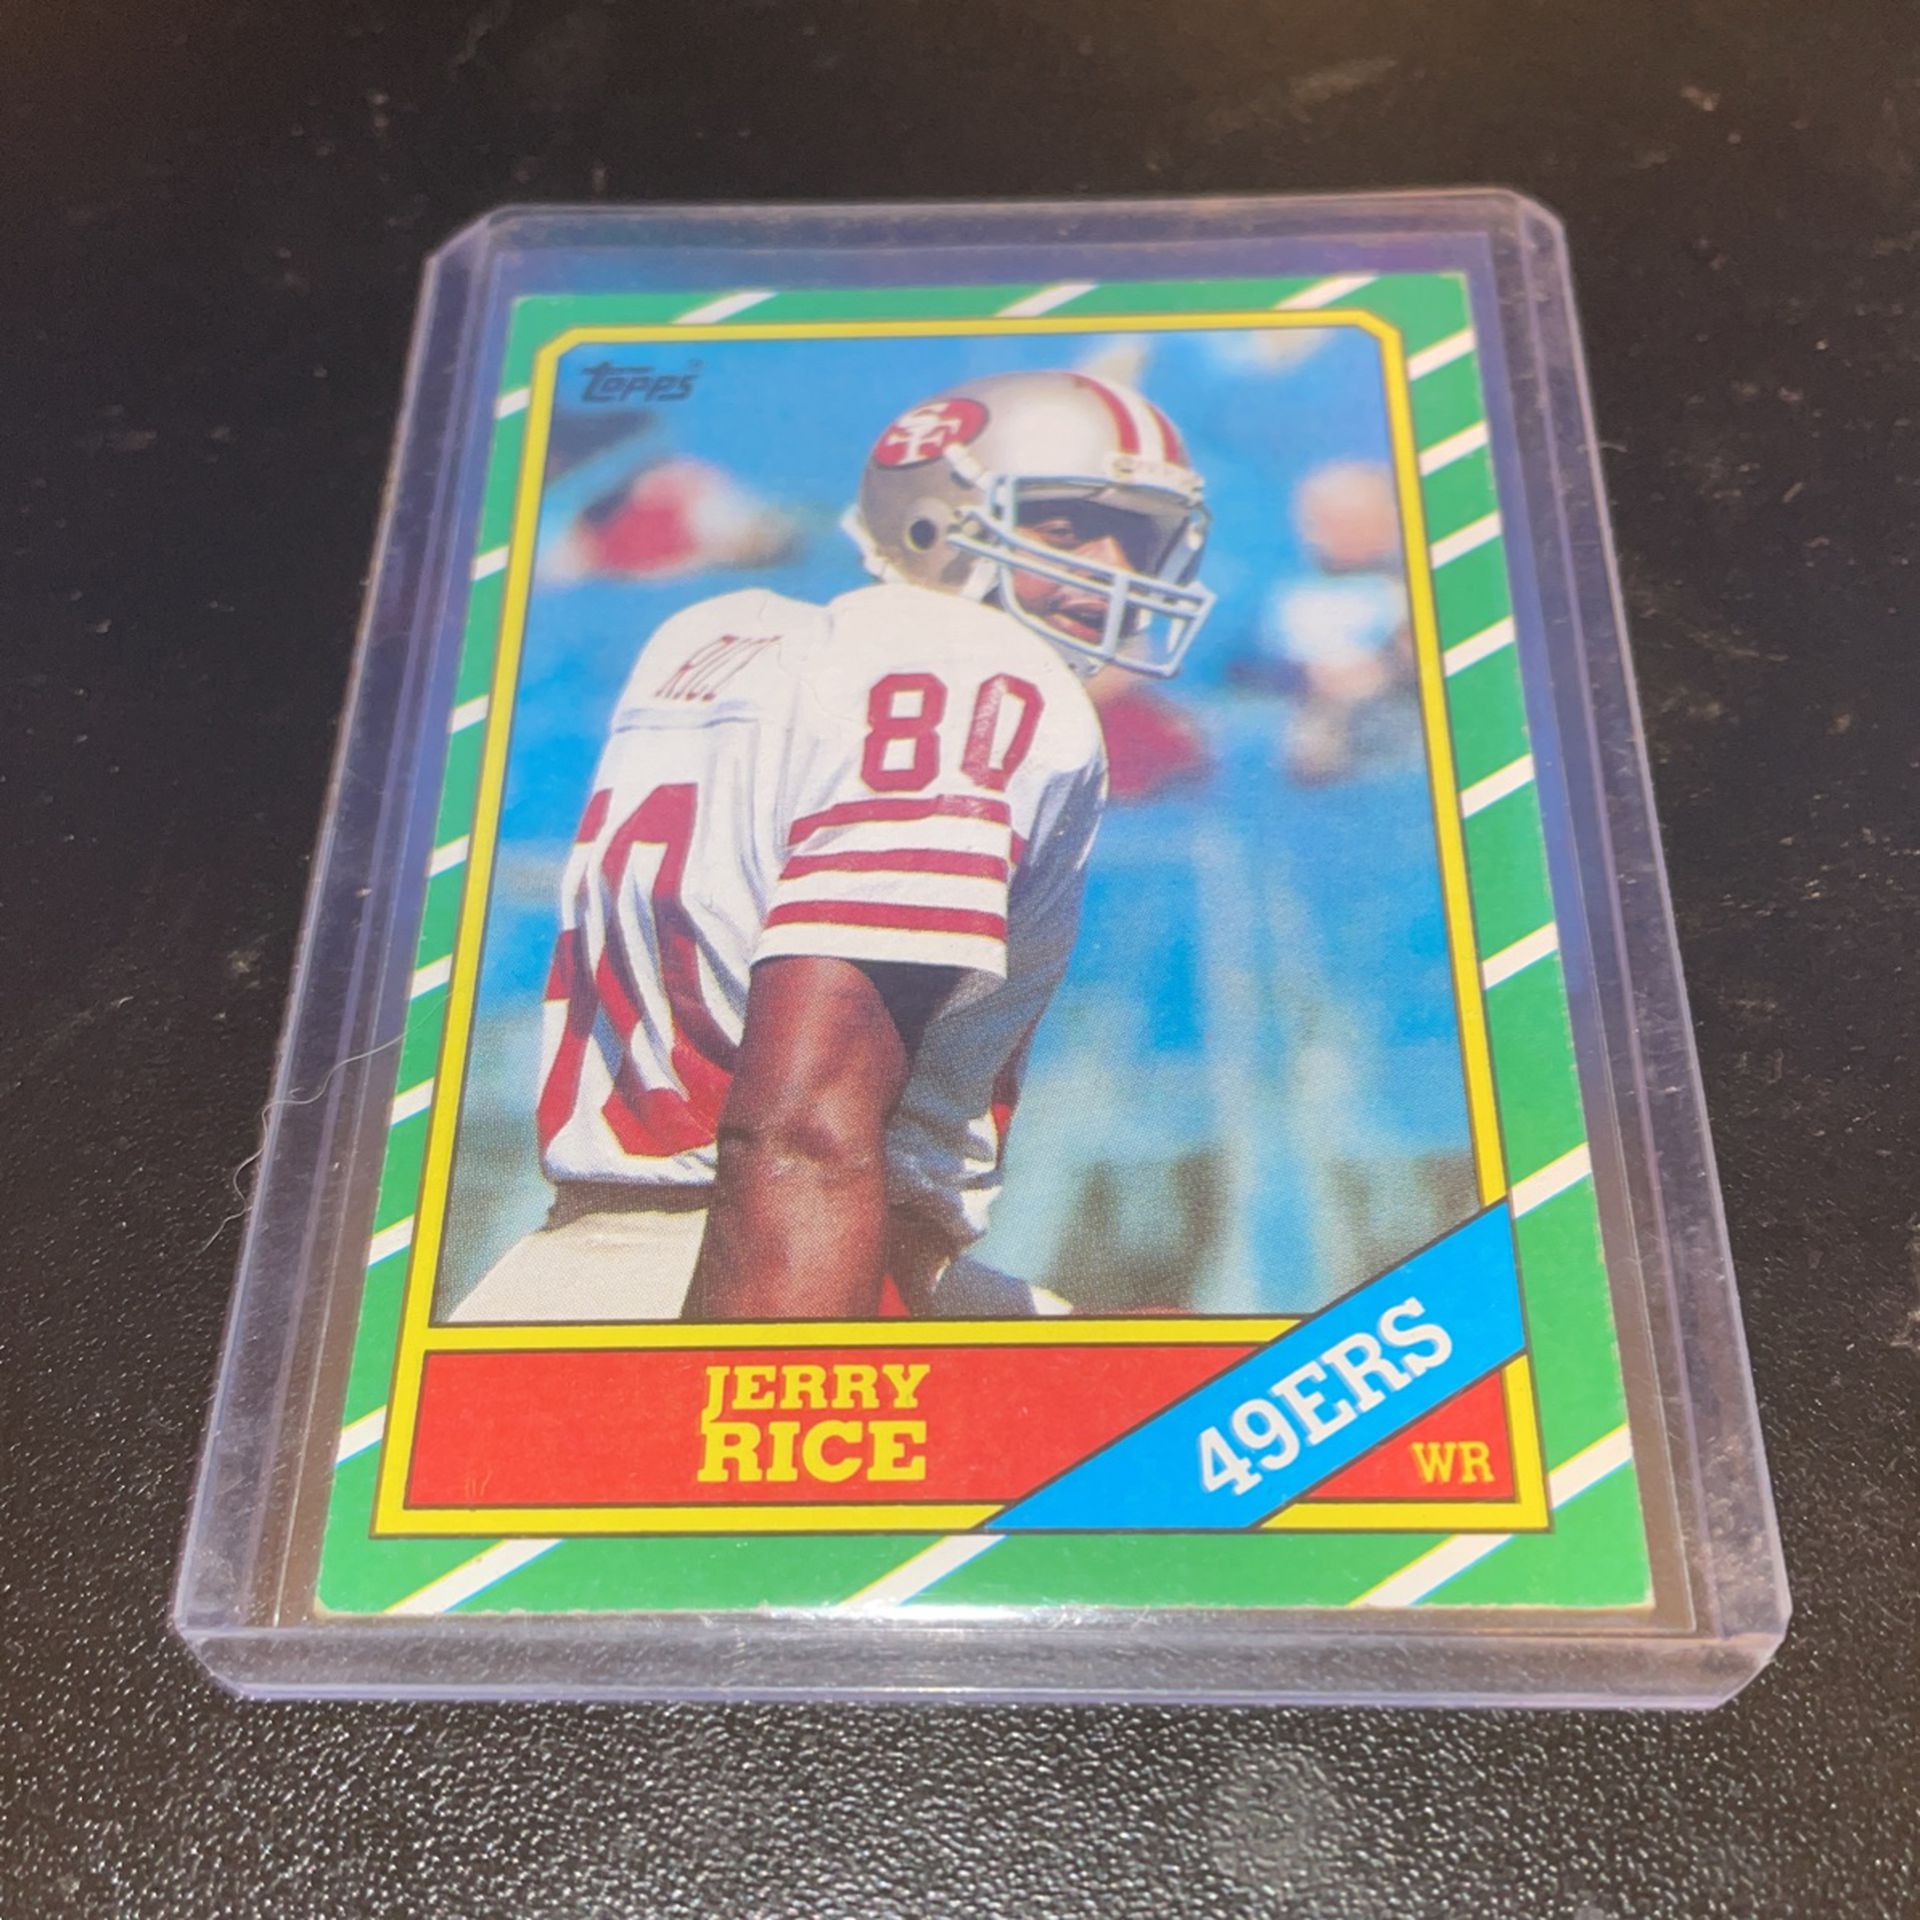 1986 TOPPS JERRY RICE RC CARD 